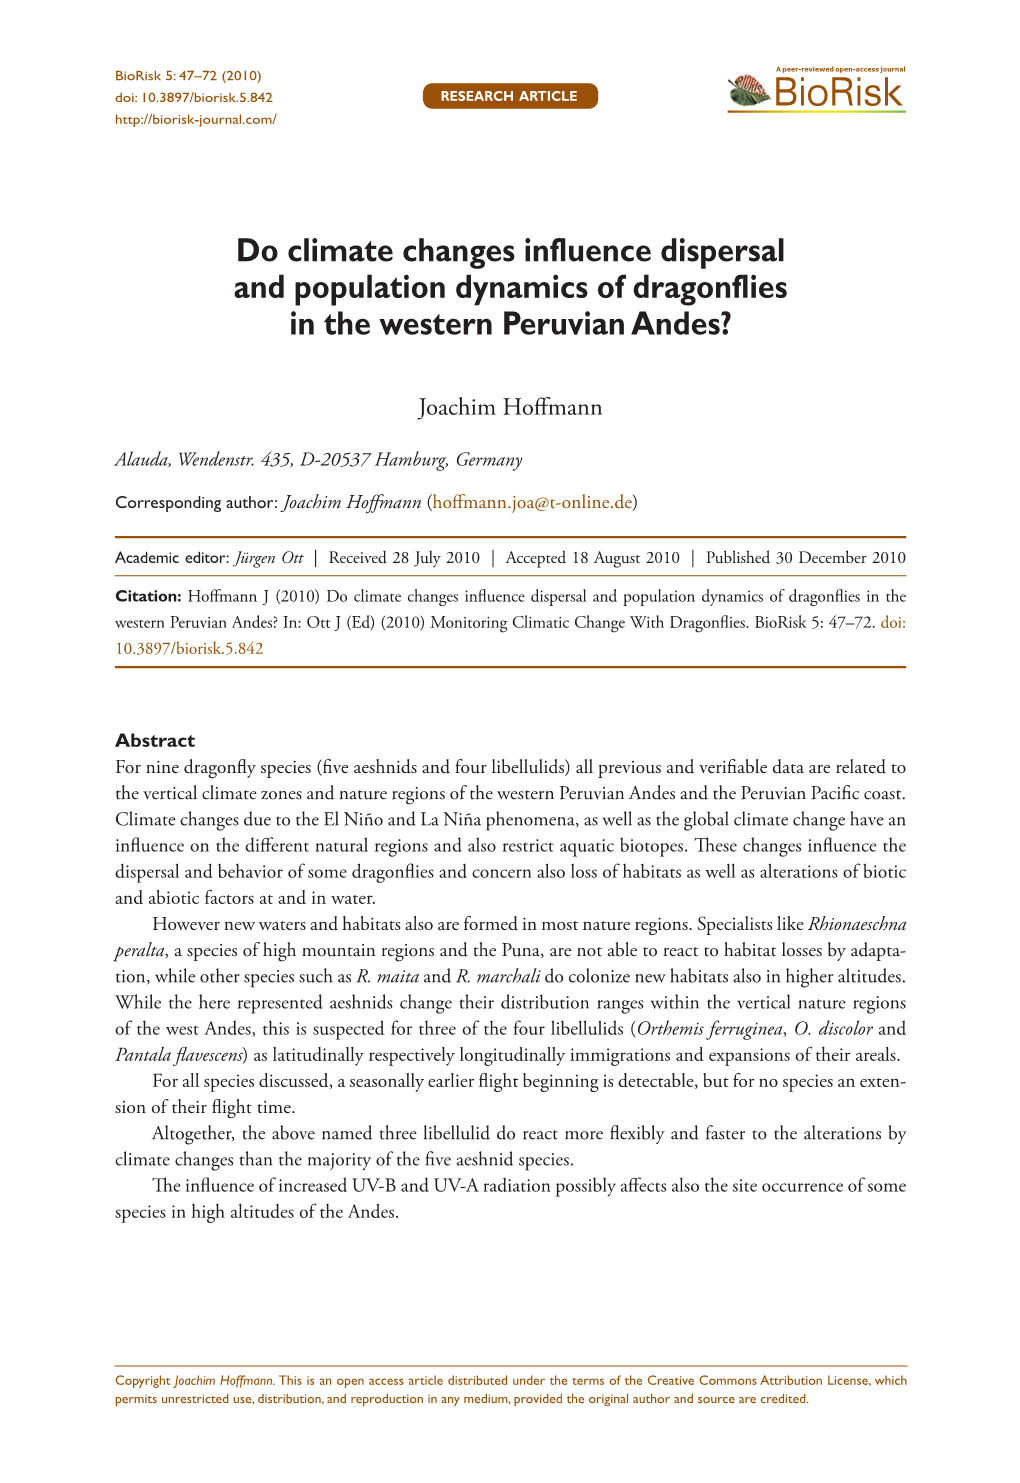 Do Climate Changes Influence Dispersal and Population Dynamics of Dragonflies in the Western Peruvian Andes?